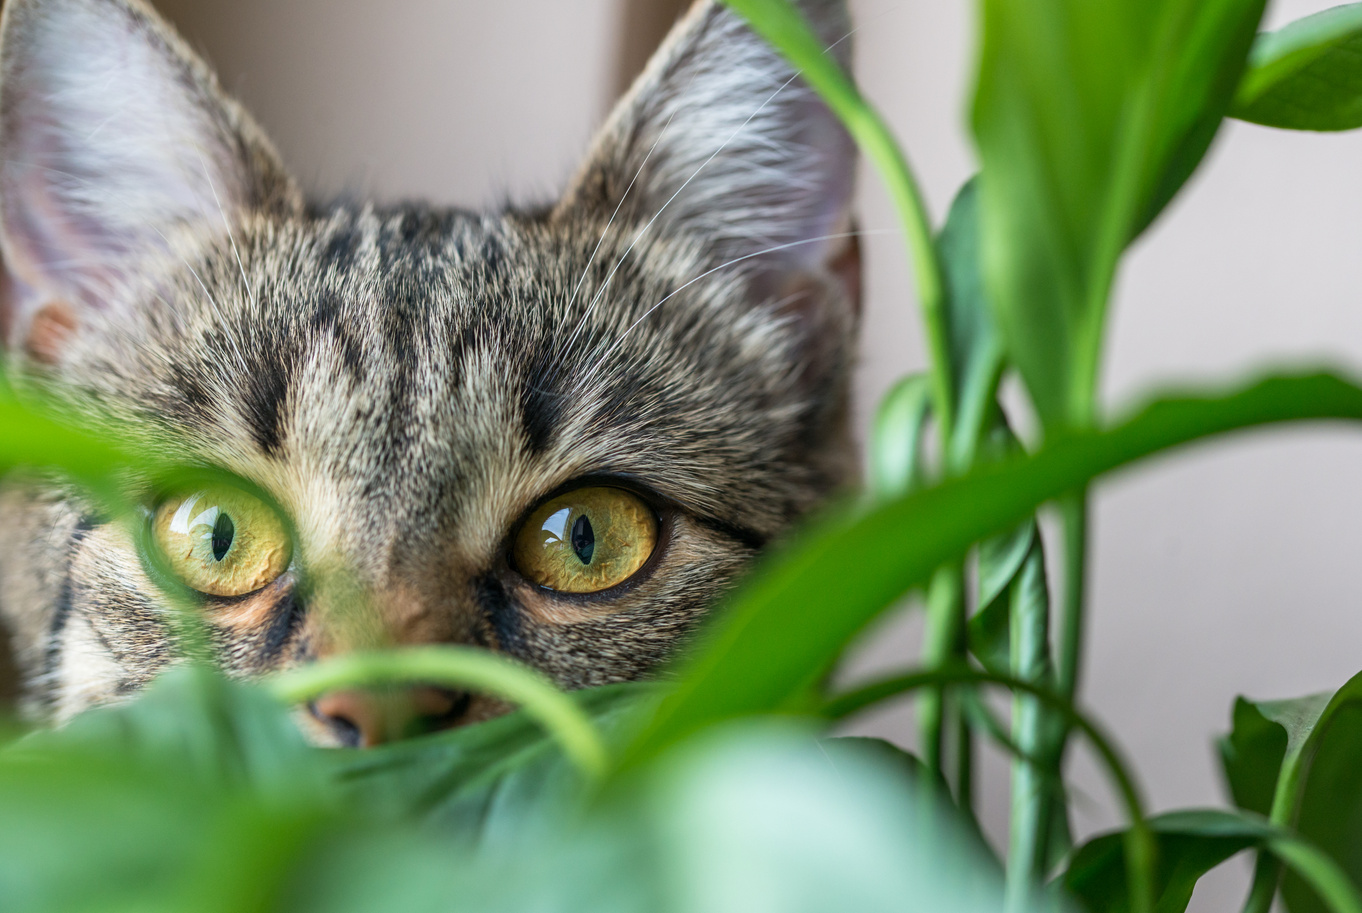 The cat behind the plant